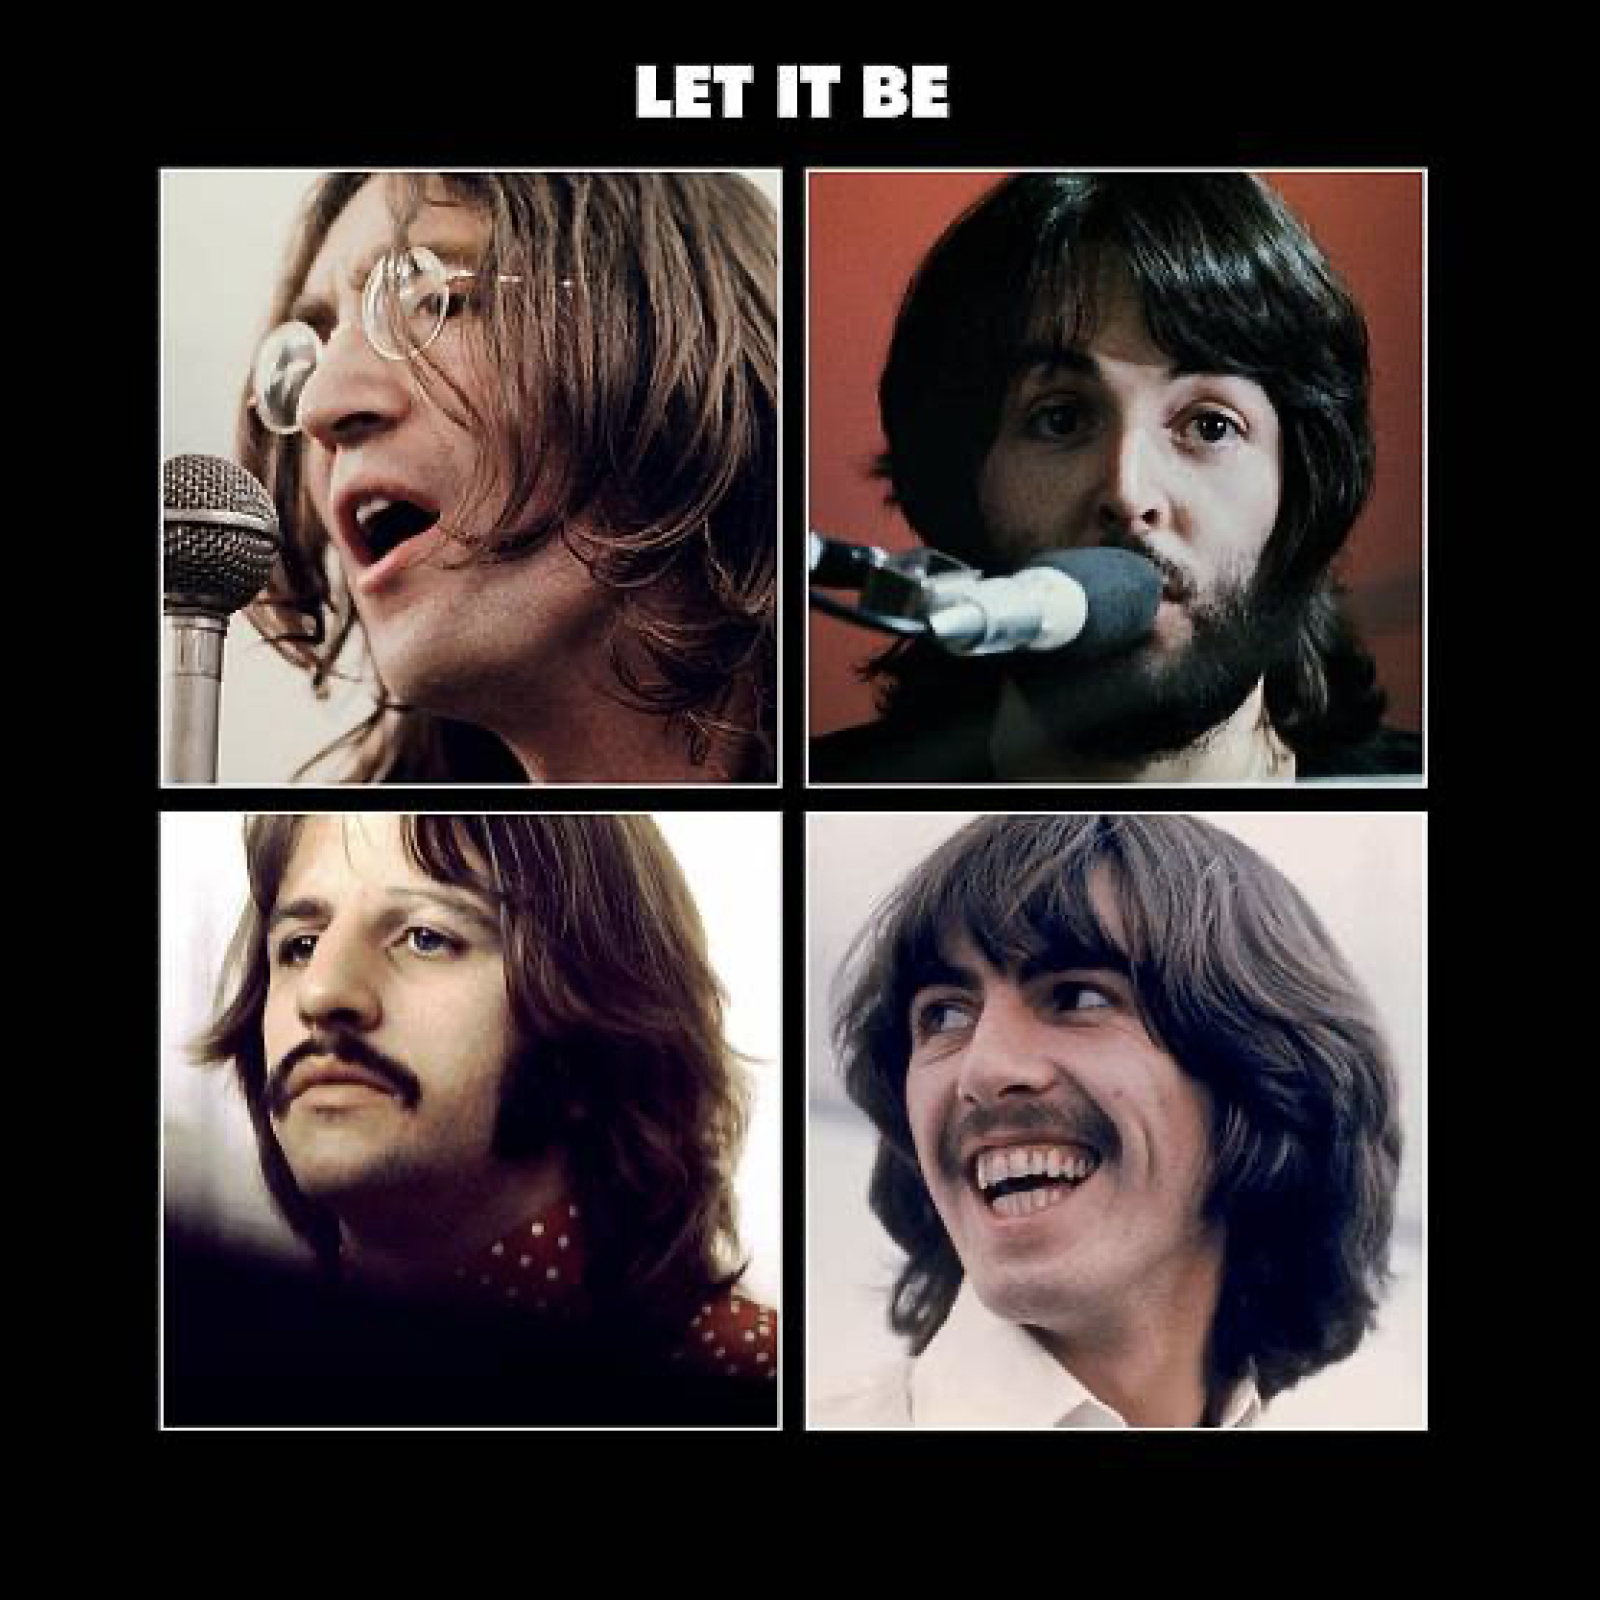 The Beatles — The Let It Be (Giles Martin 2021 edition)